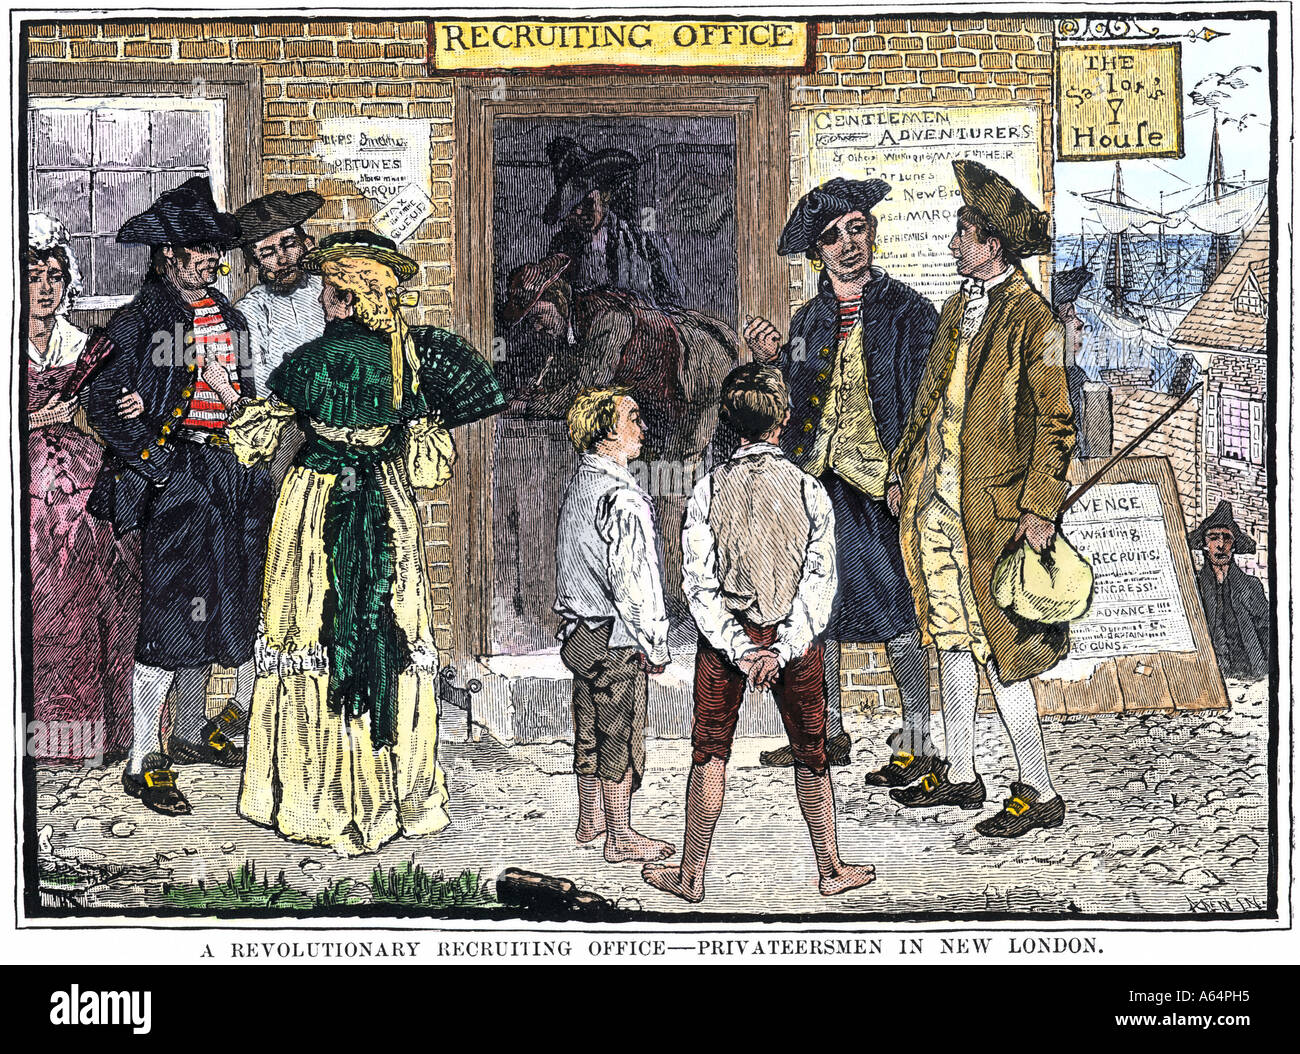 Recruiting privateersmen to serve the American cause in the Revolutionary War in New London CT. Hand-colored woodcut of Howard Pyle illustration Stock Photo